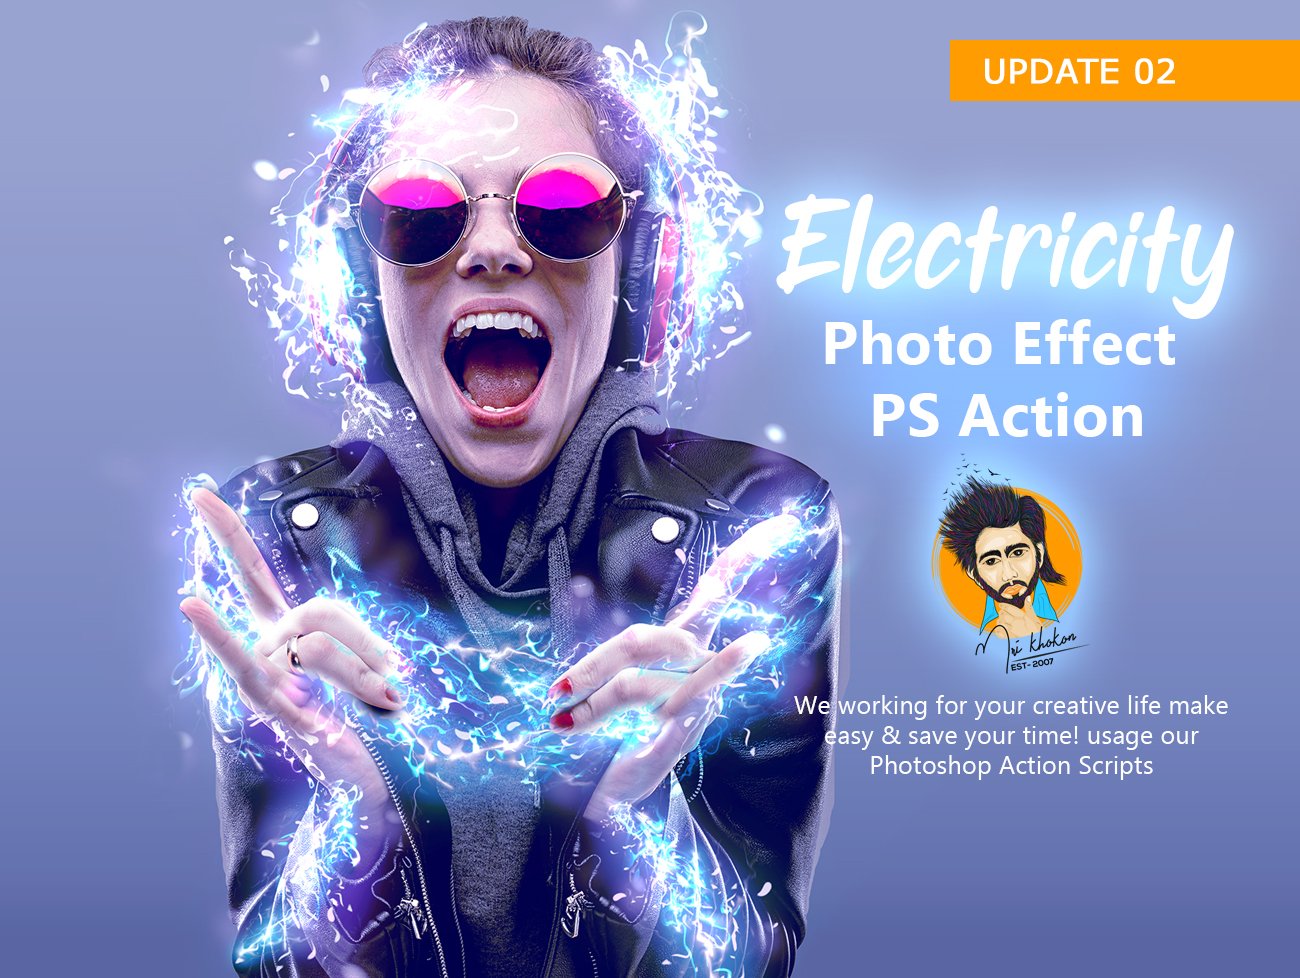 Electricity Photo Effect PS Actioncover image.